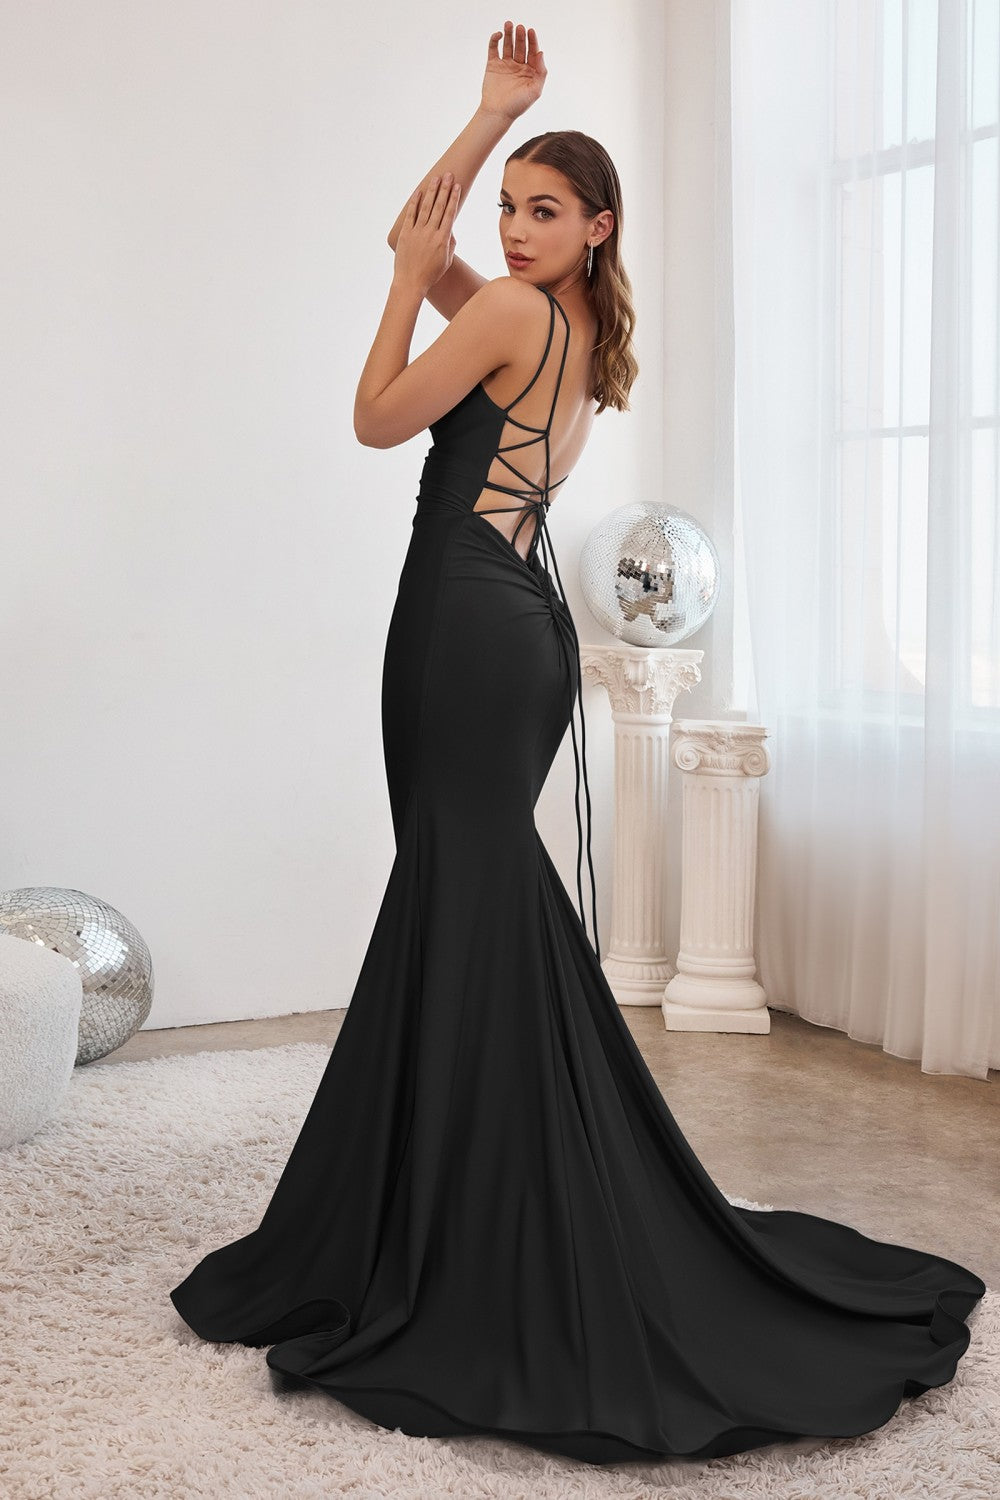 Black_1 Long Stretch Mermaid Gown CD2219 - Women Evening Formal Gown - Special Occasion